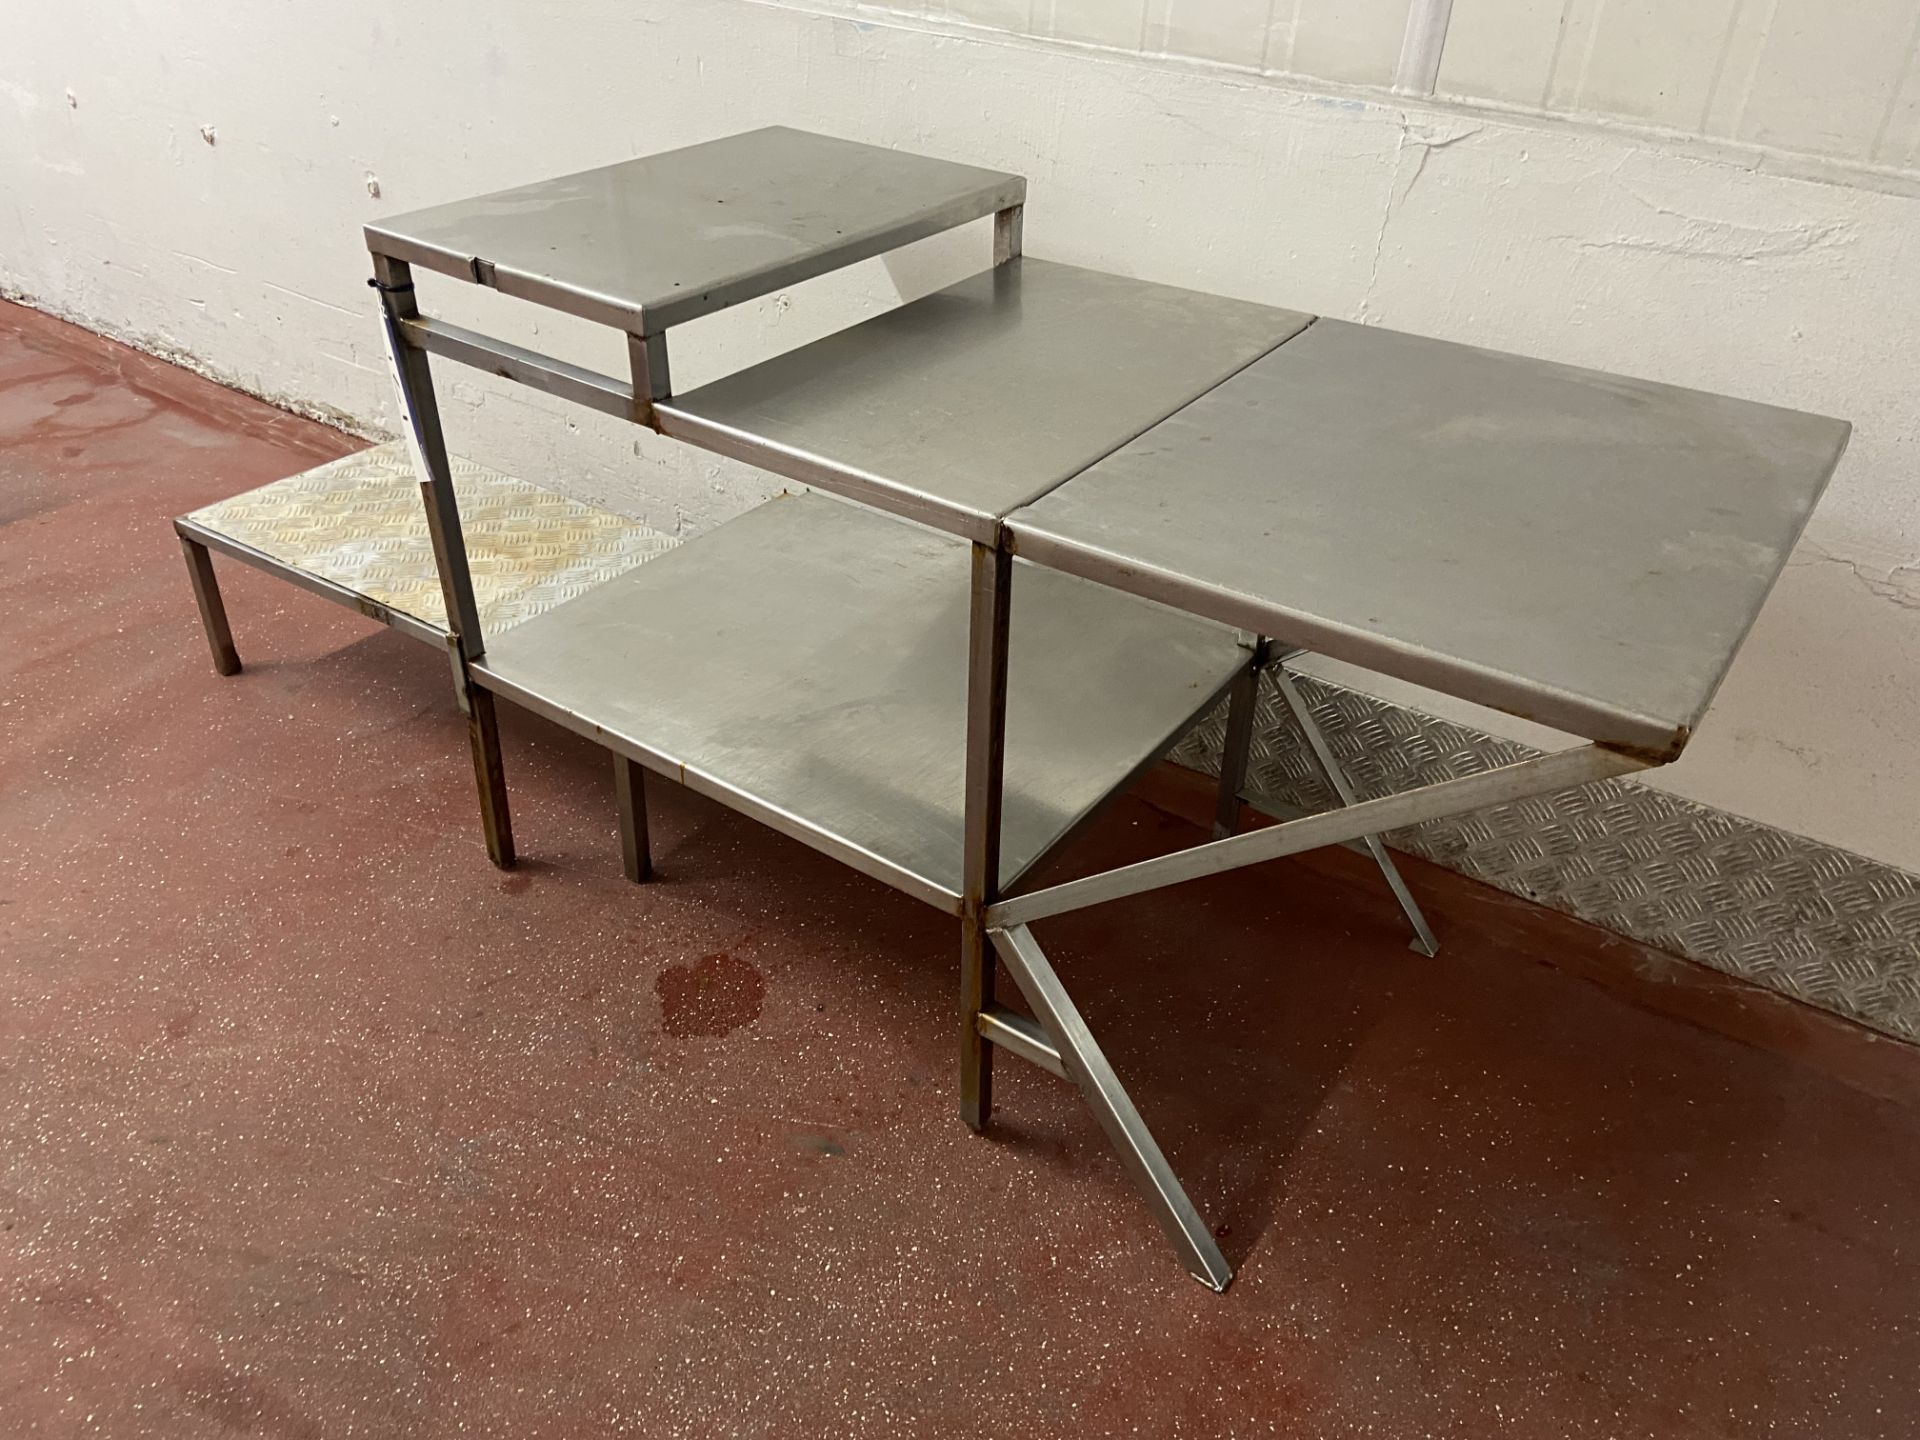 Stainless Steel Top Bench, approx. 1.28m x 620mm, fitted undershelf and with stainless steel - Image 2 of 2